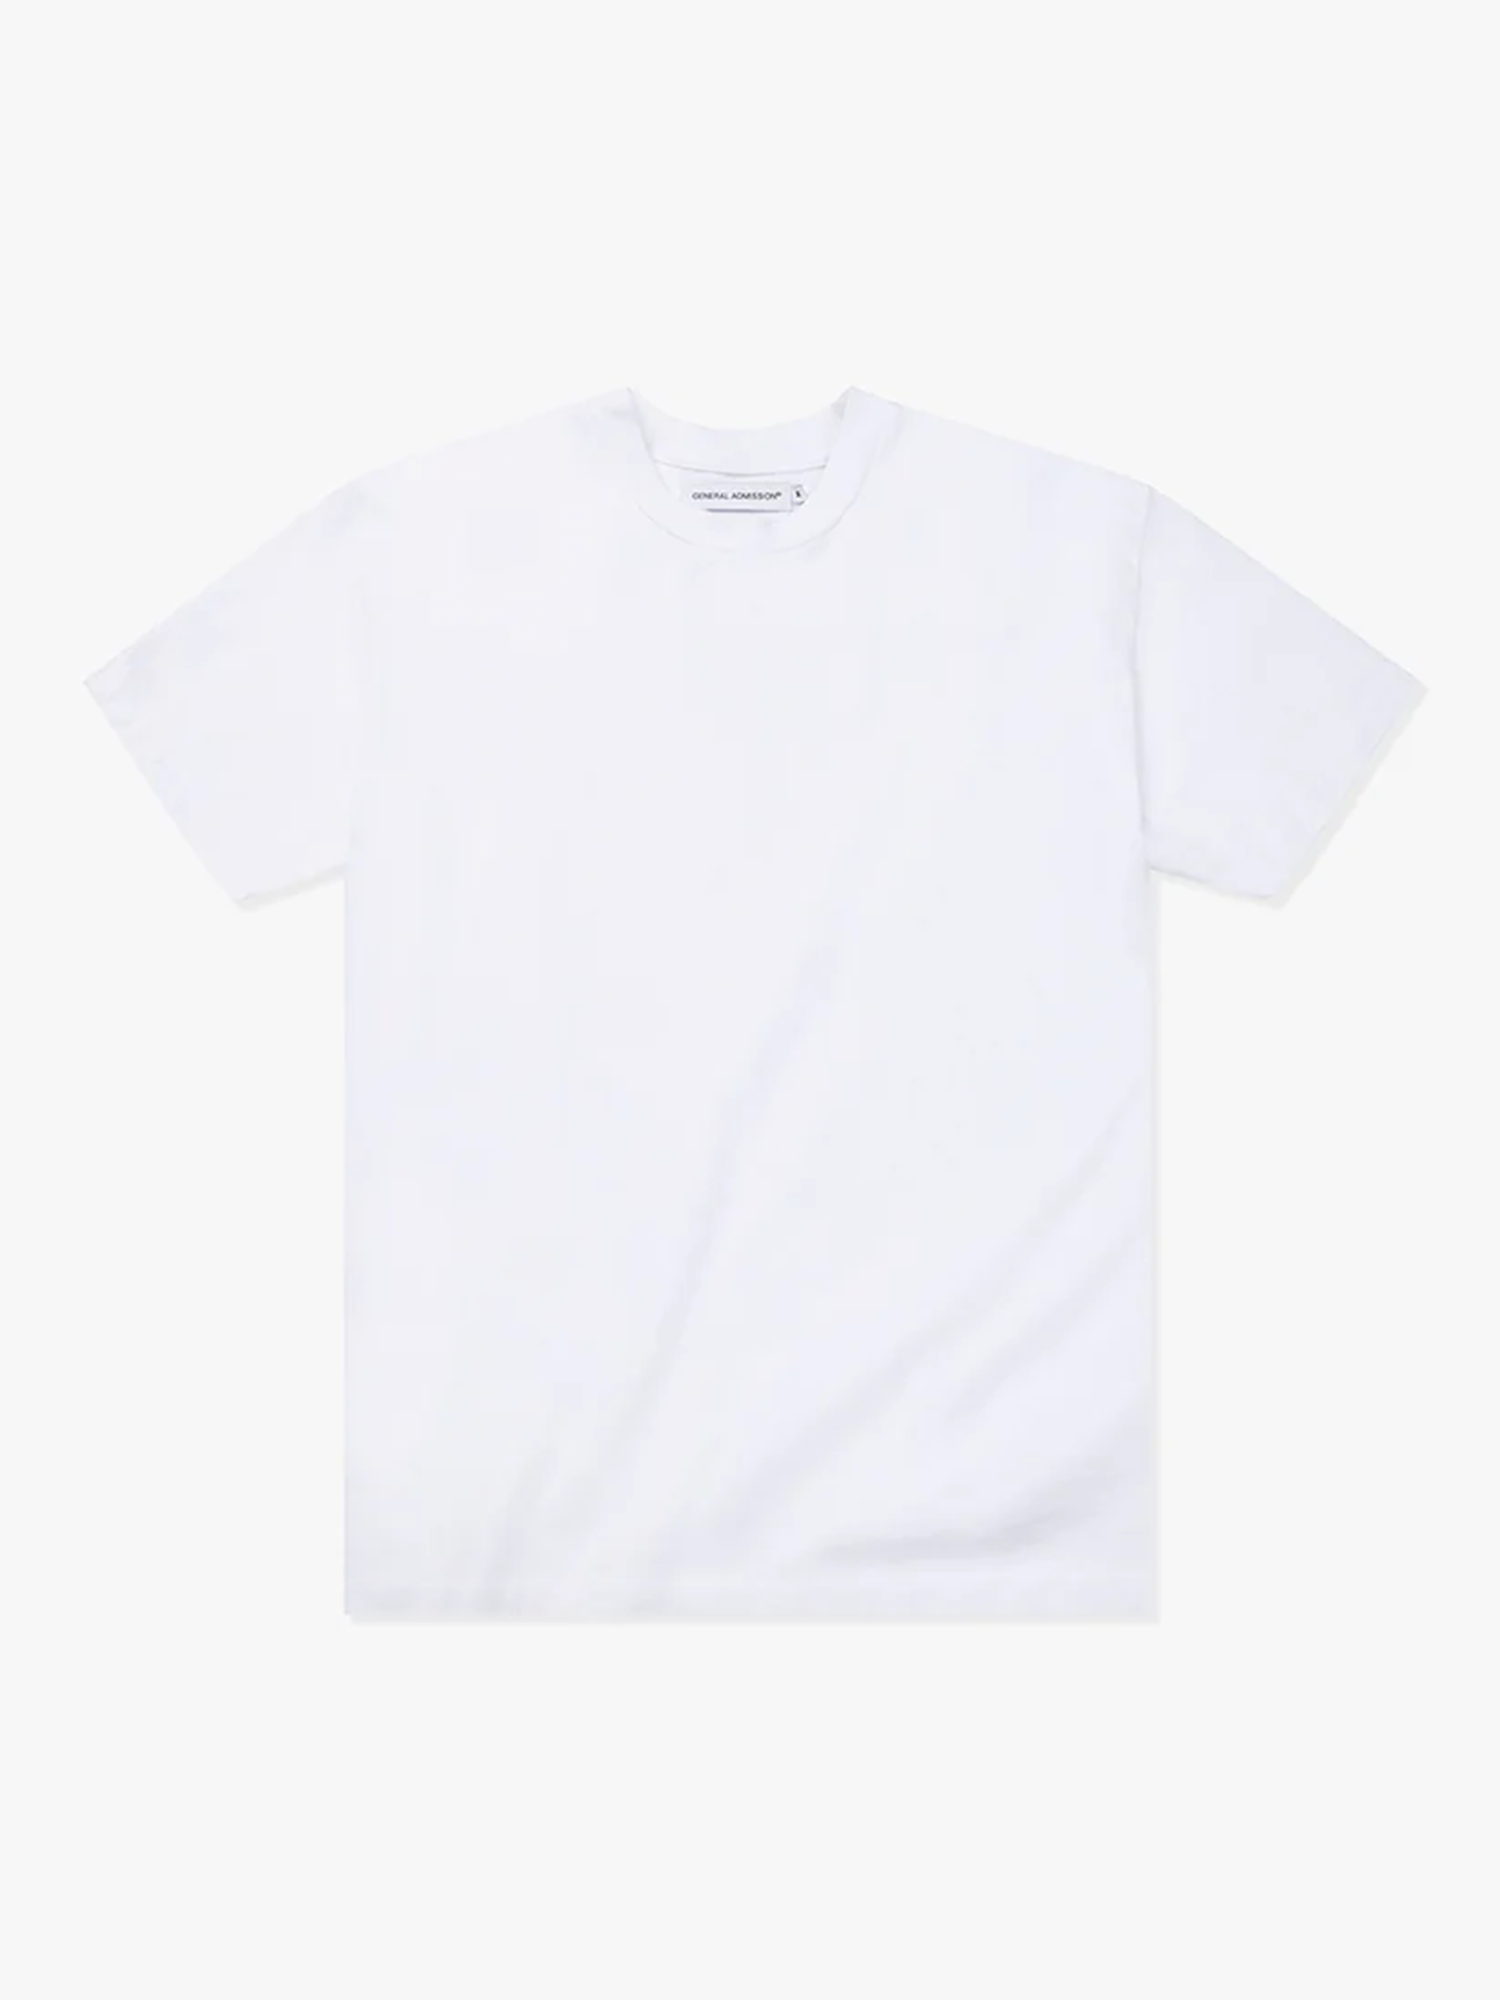 General Admission - Tee - Loose Knit - Tee - White